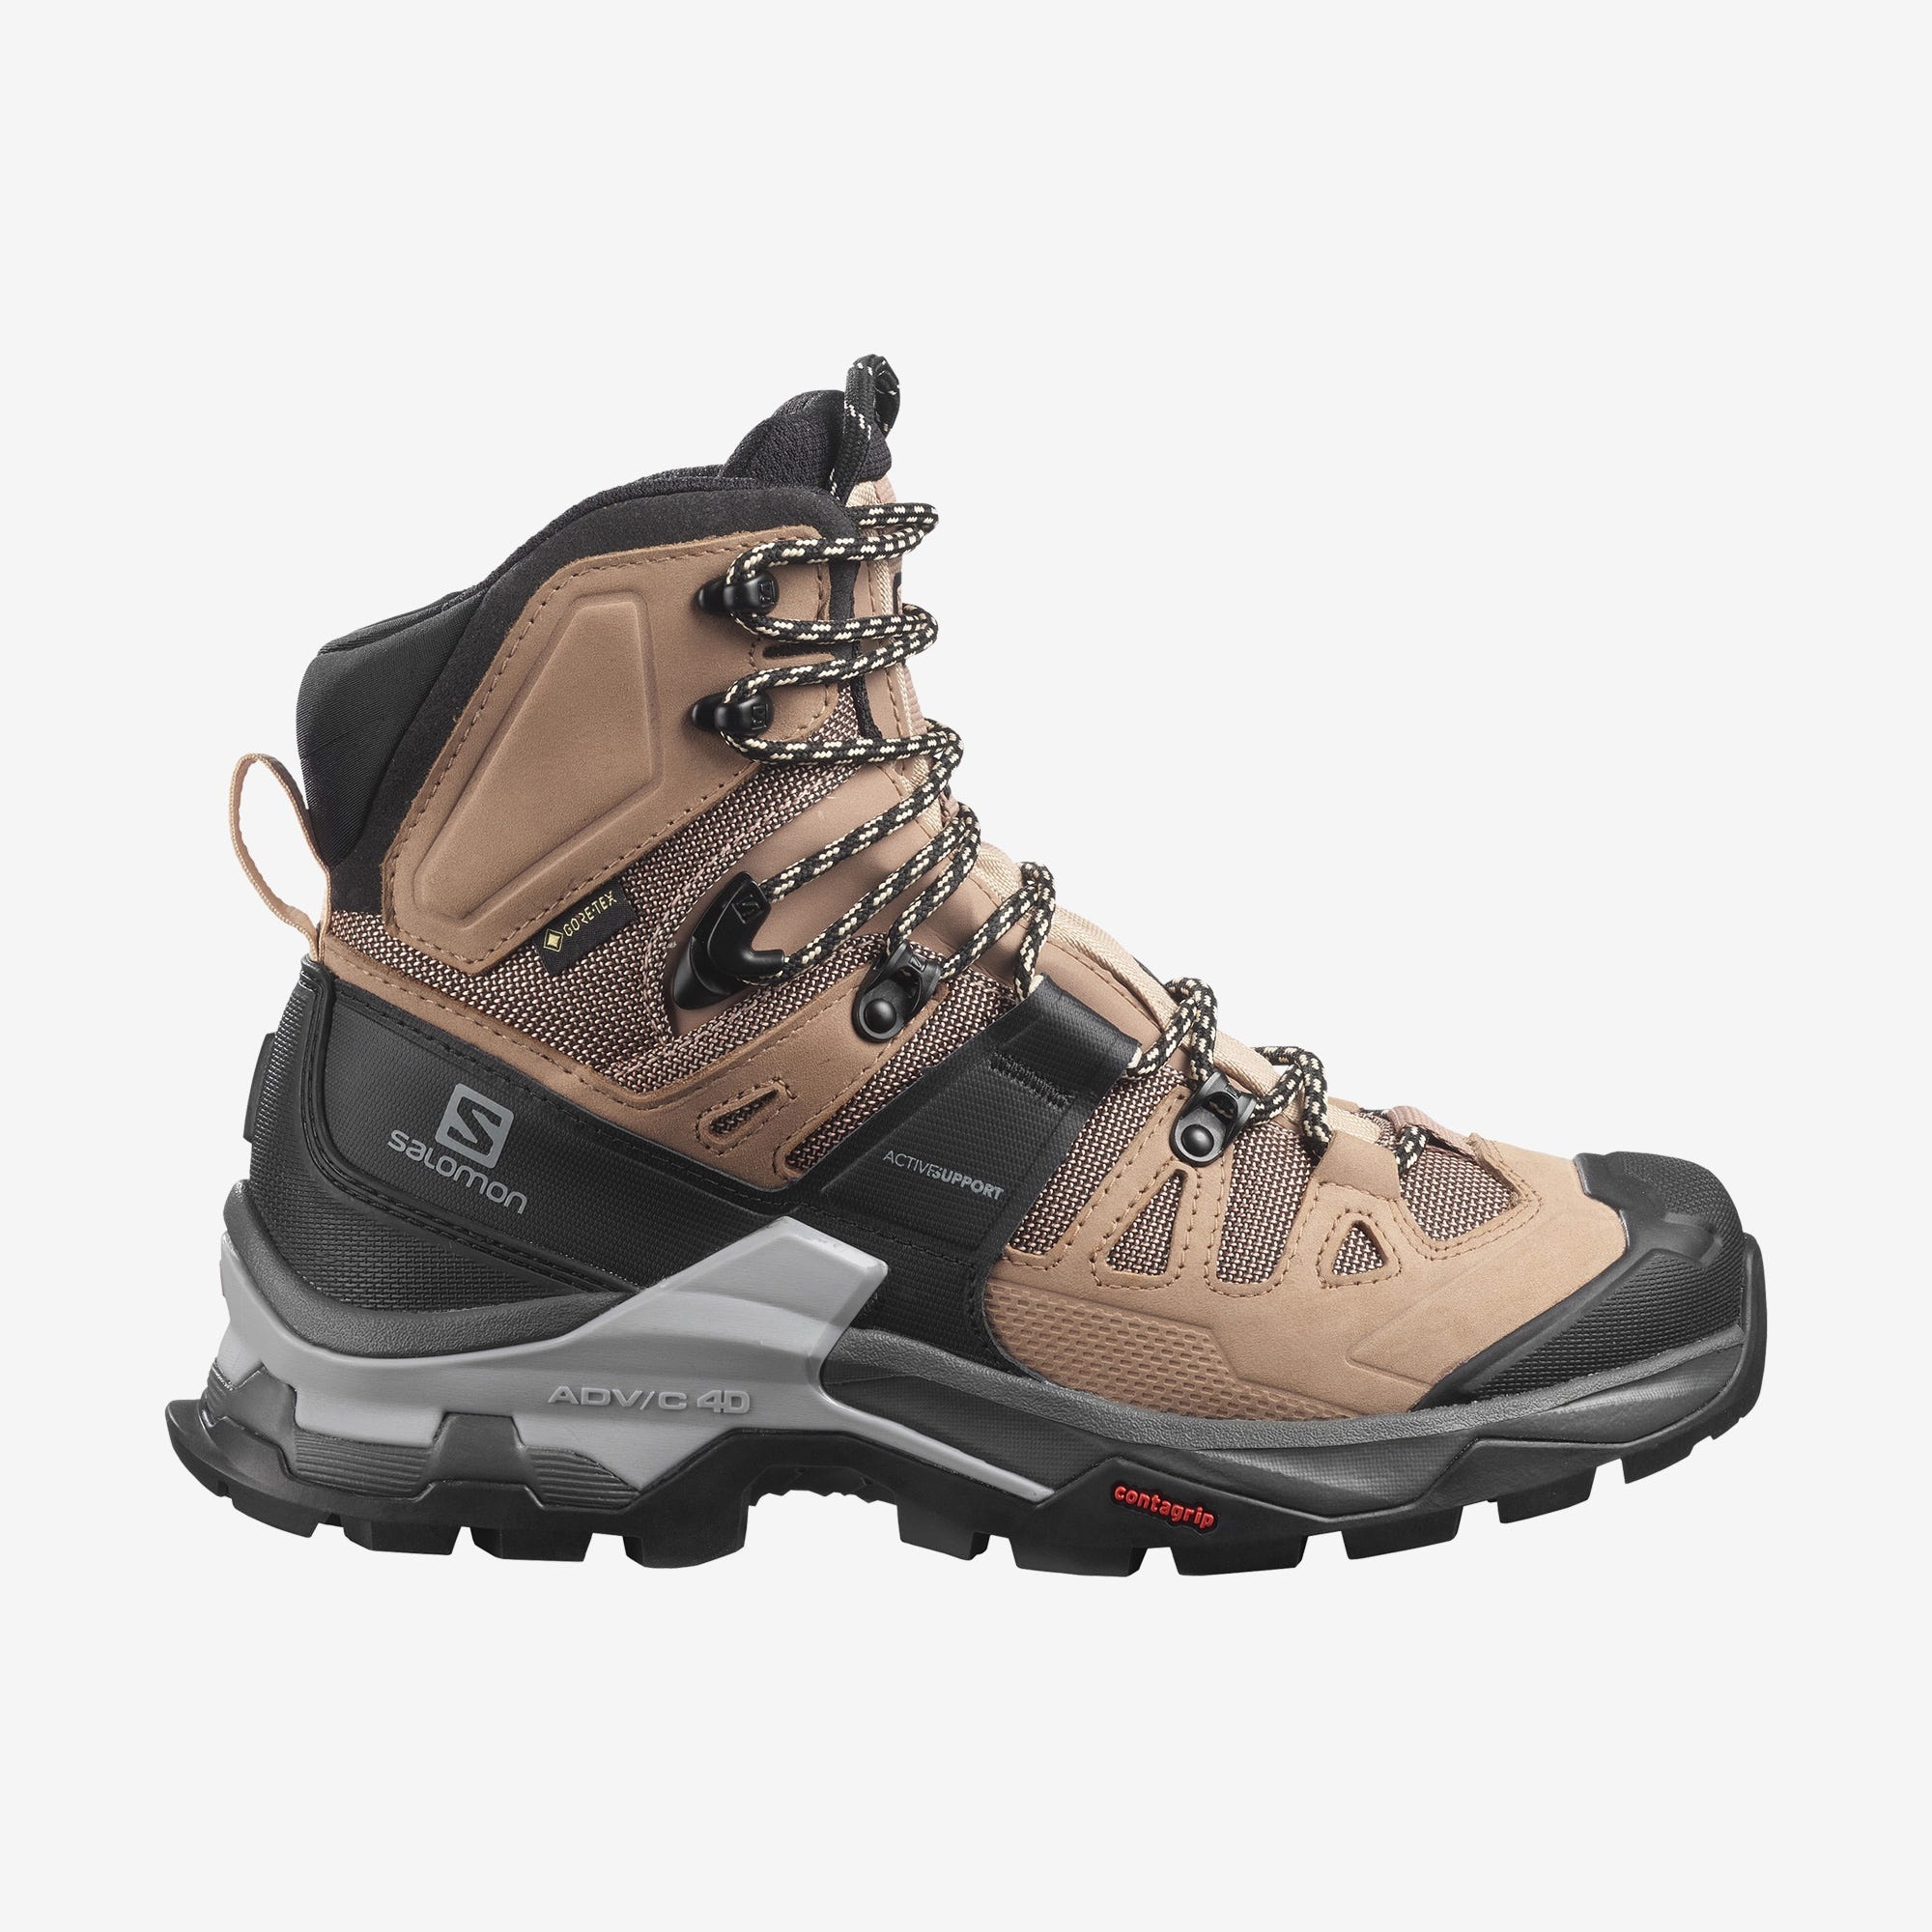 Women's Quest 4 Gore-Tex Hiking Boots